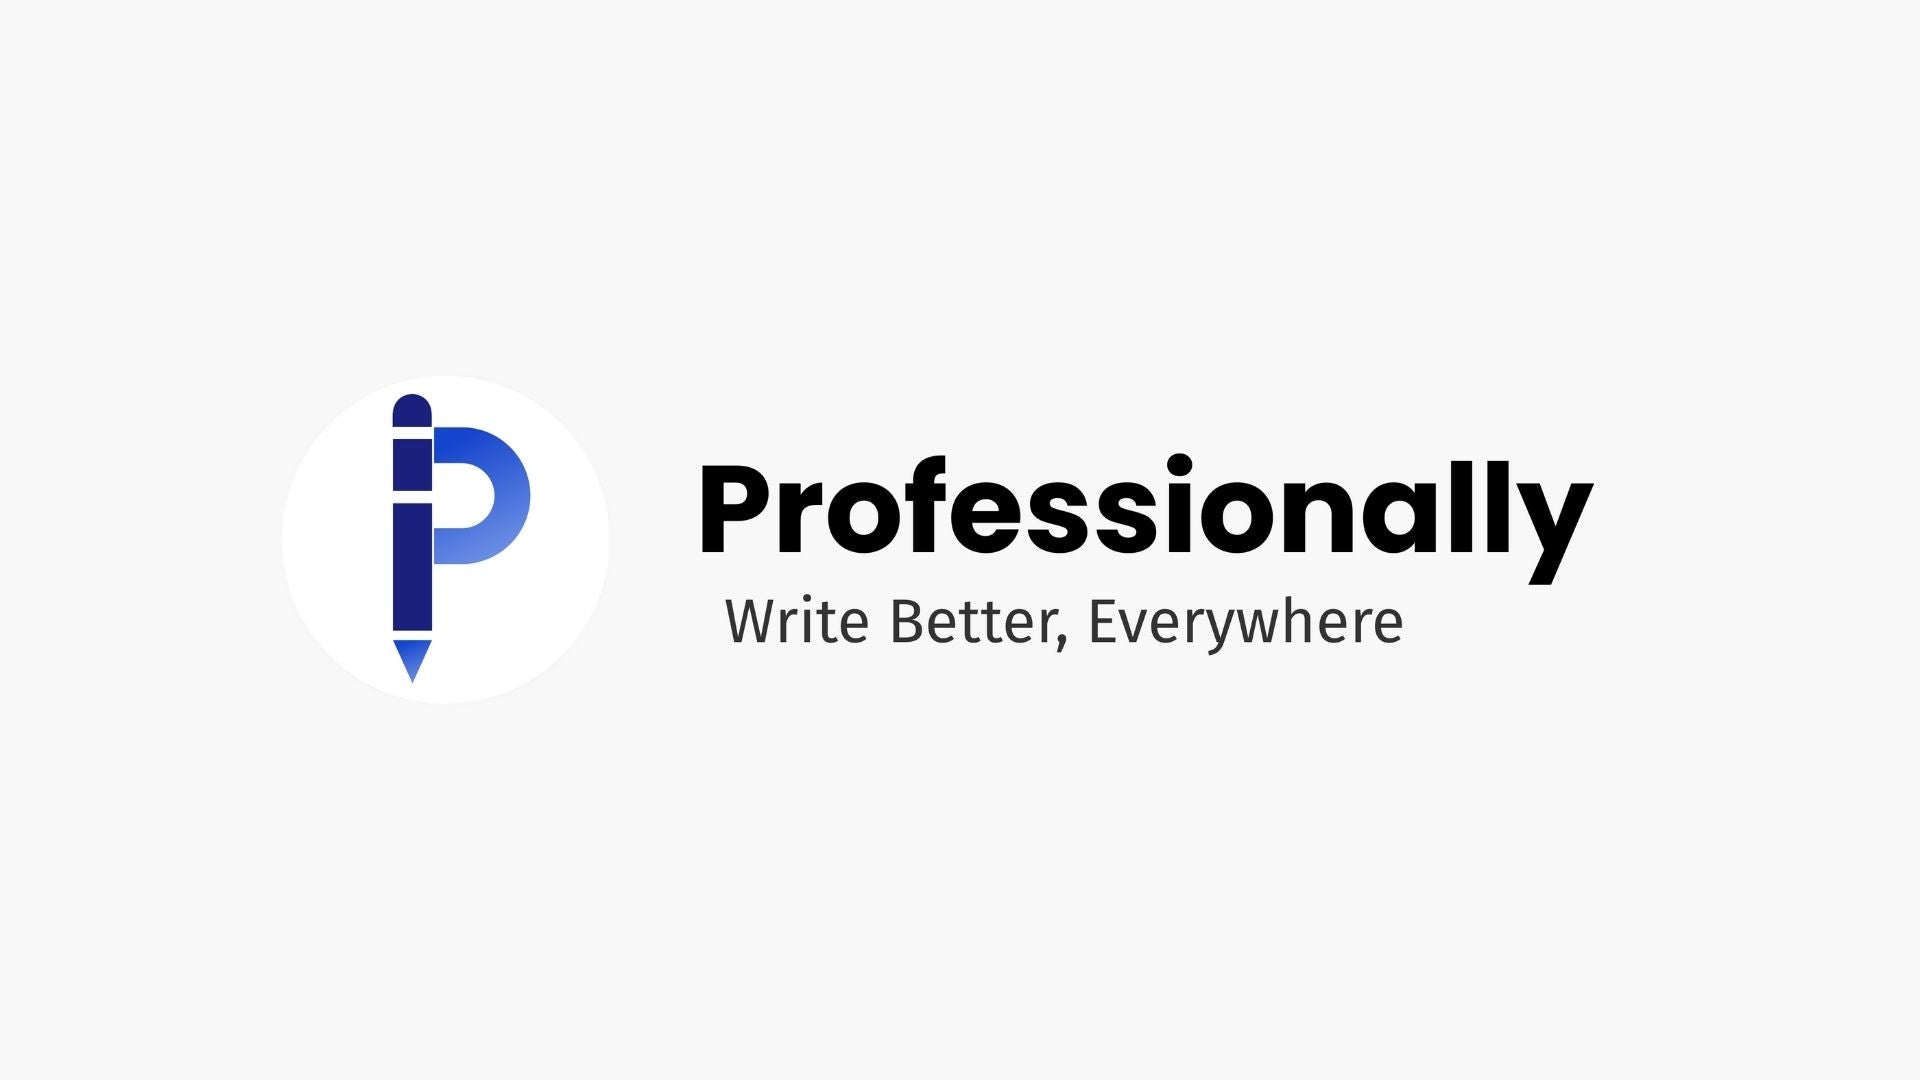 Load video: Learn how Professionally works in your browser and how it can help you write better email.